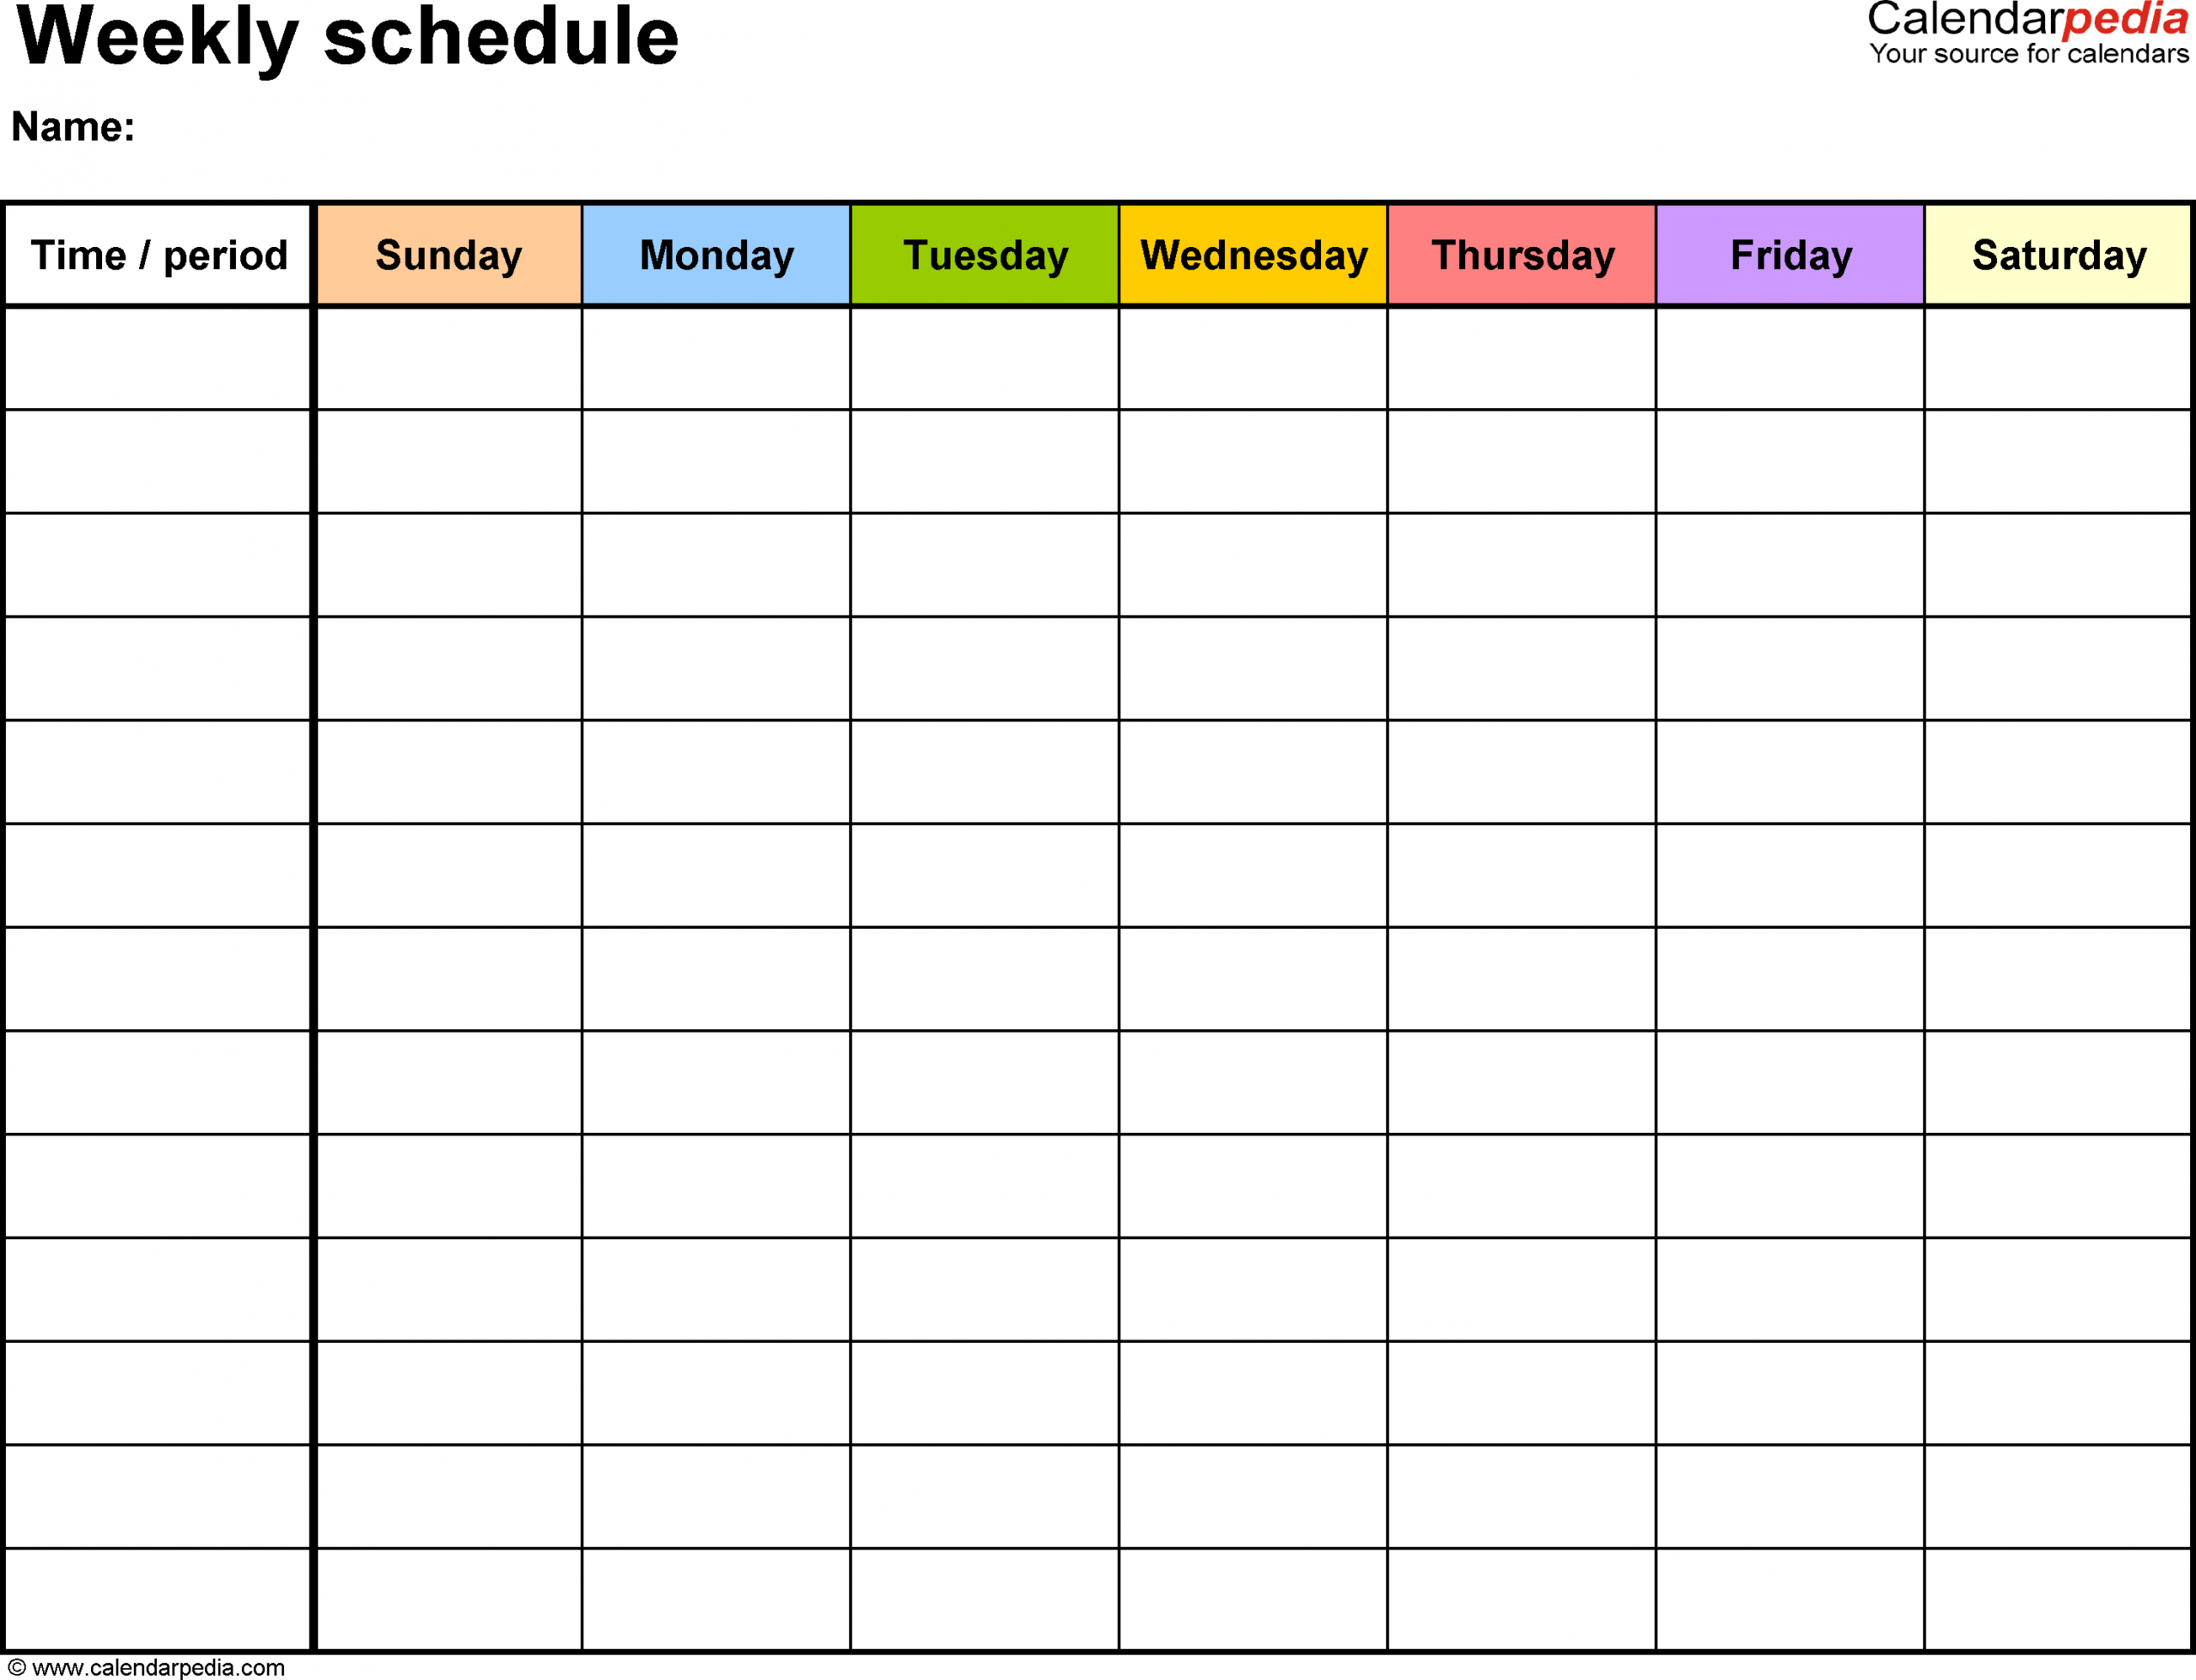 Free Weekly Schedule Templates For Word 18 Templates 2